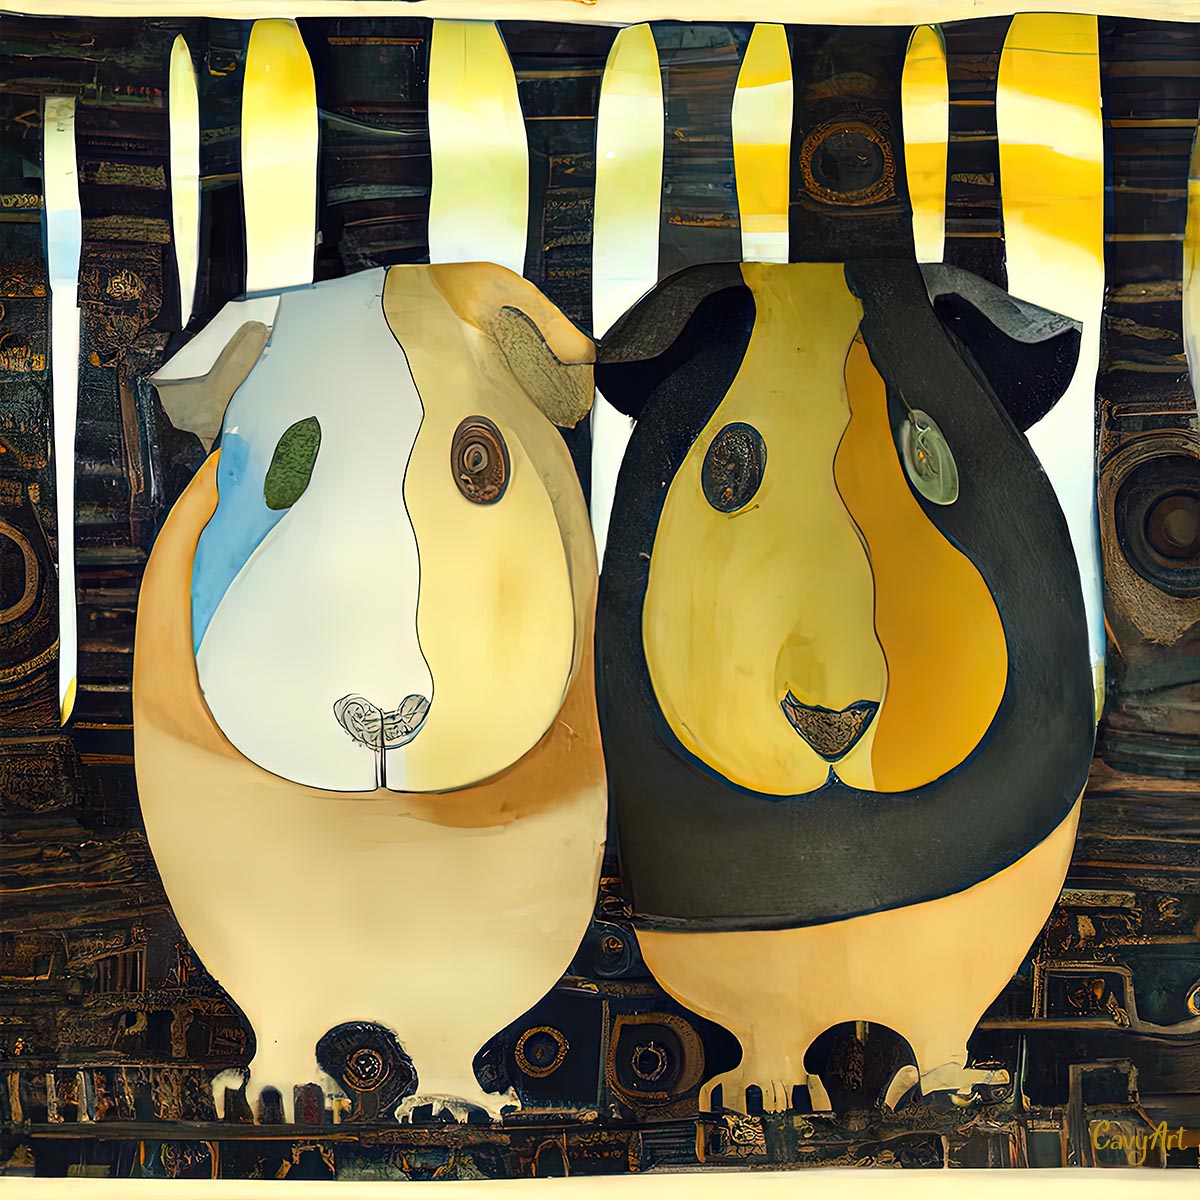 Two guinea pigs in a forest illustration from CavyArt